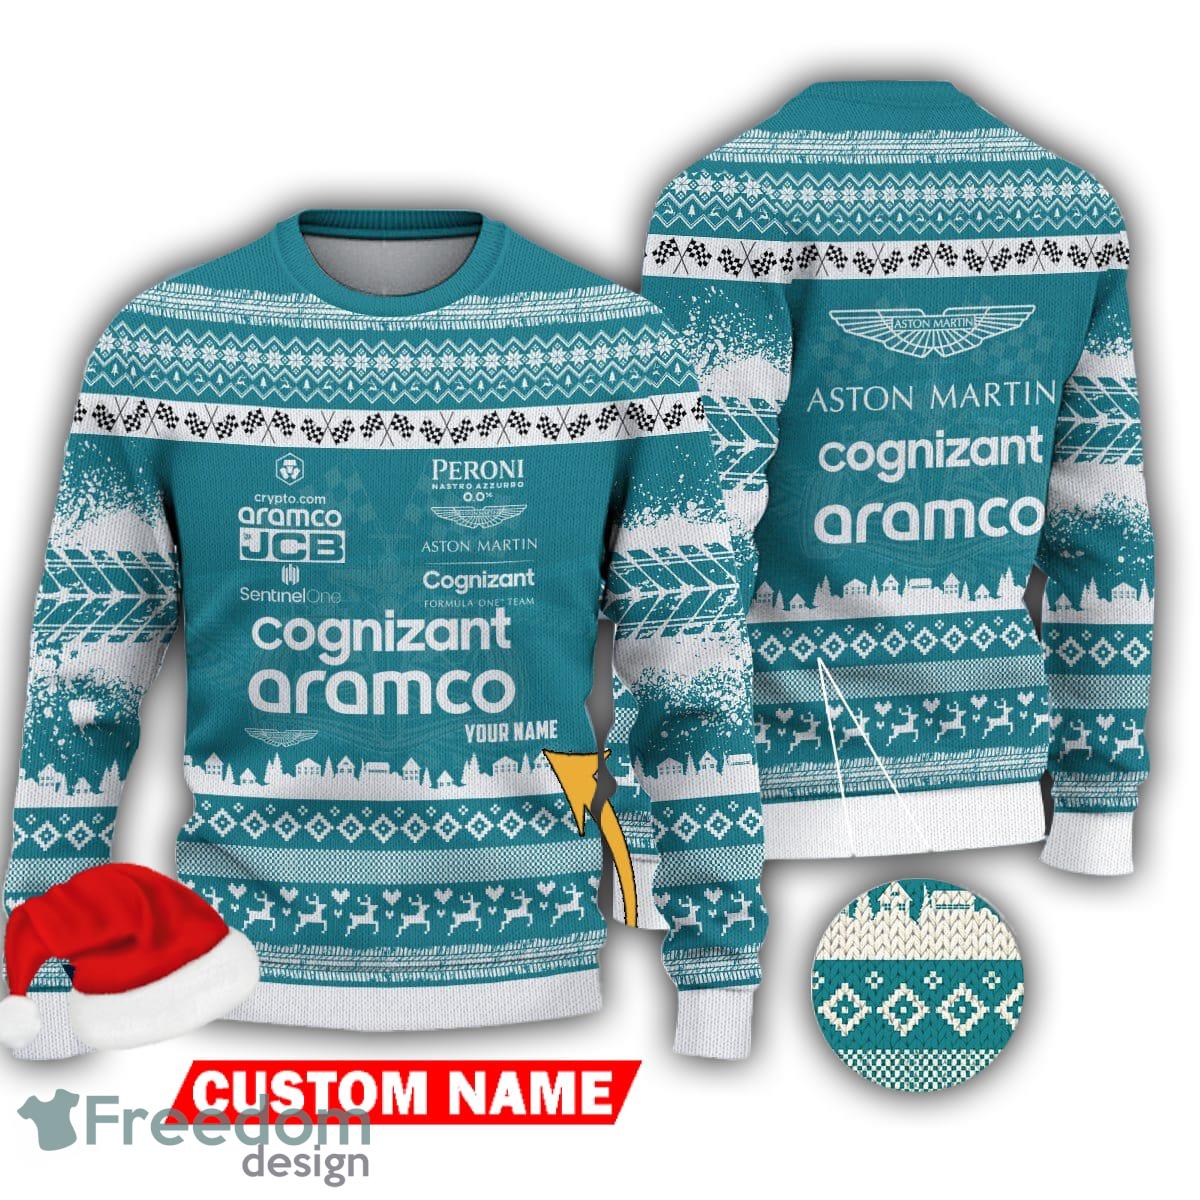 F1 Formula One Teams Christmas Sweater Lightweight Ugly Sweater